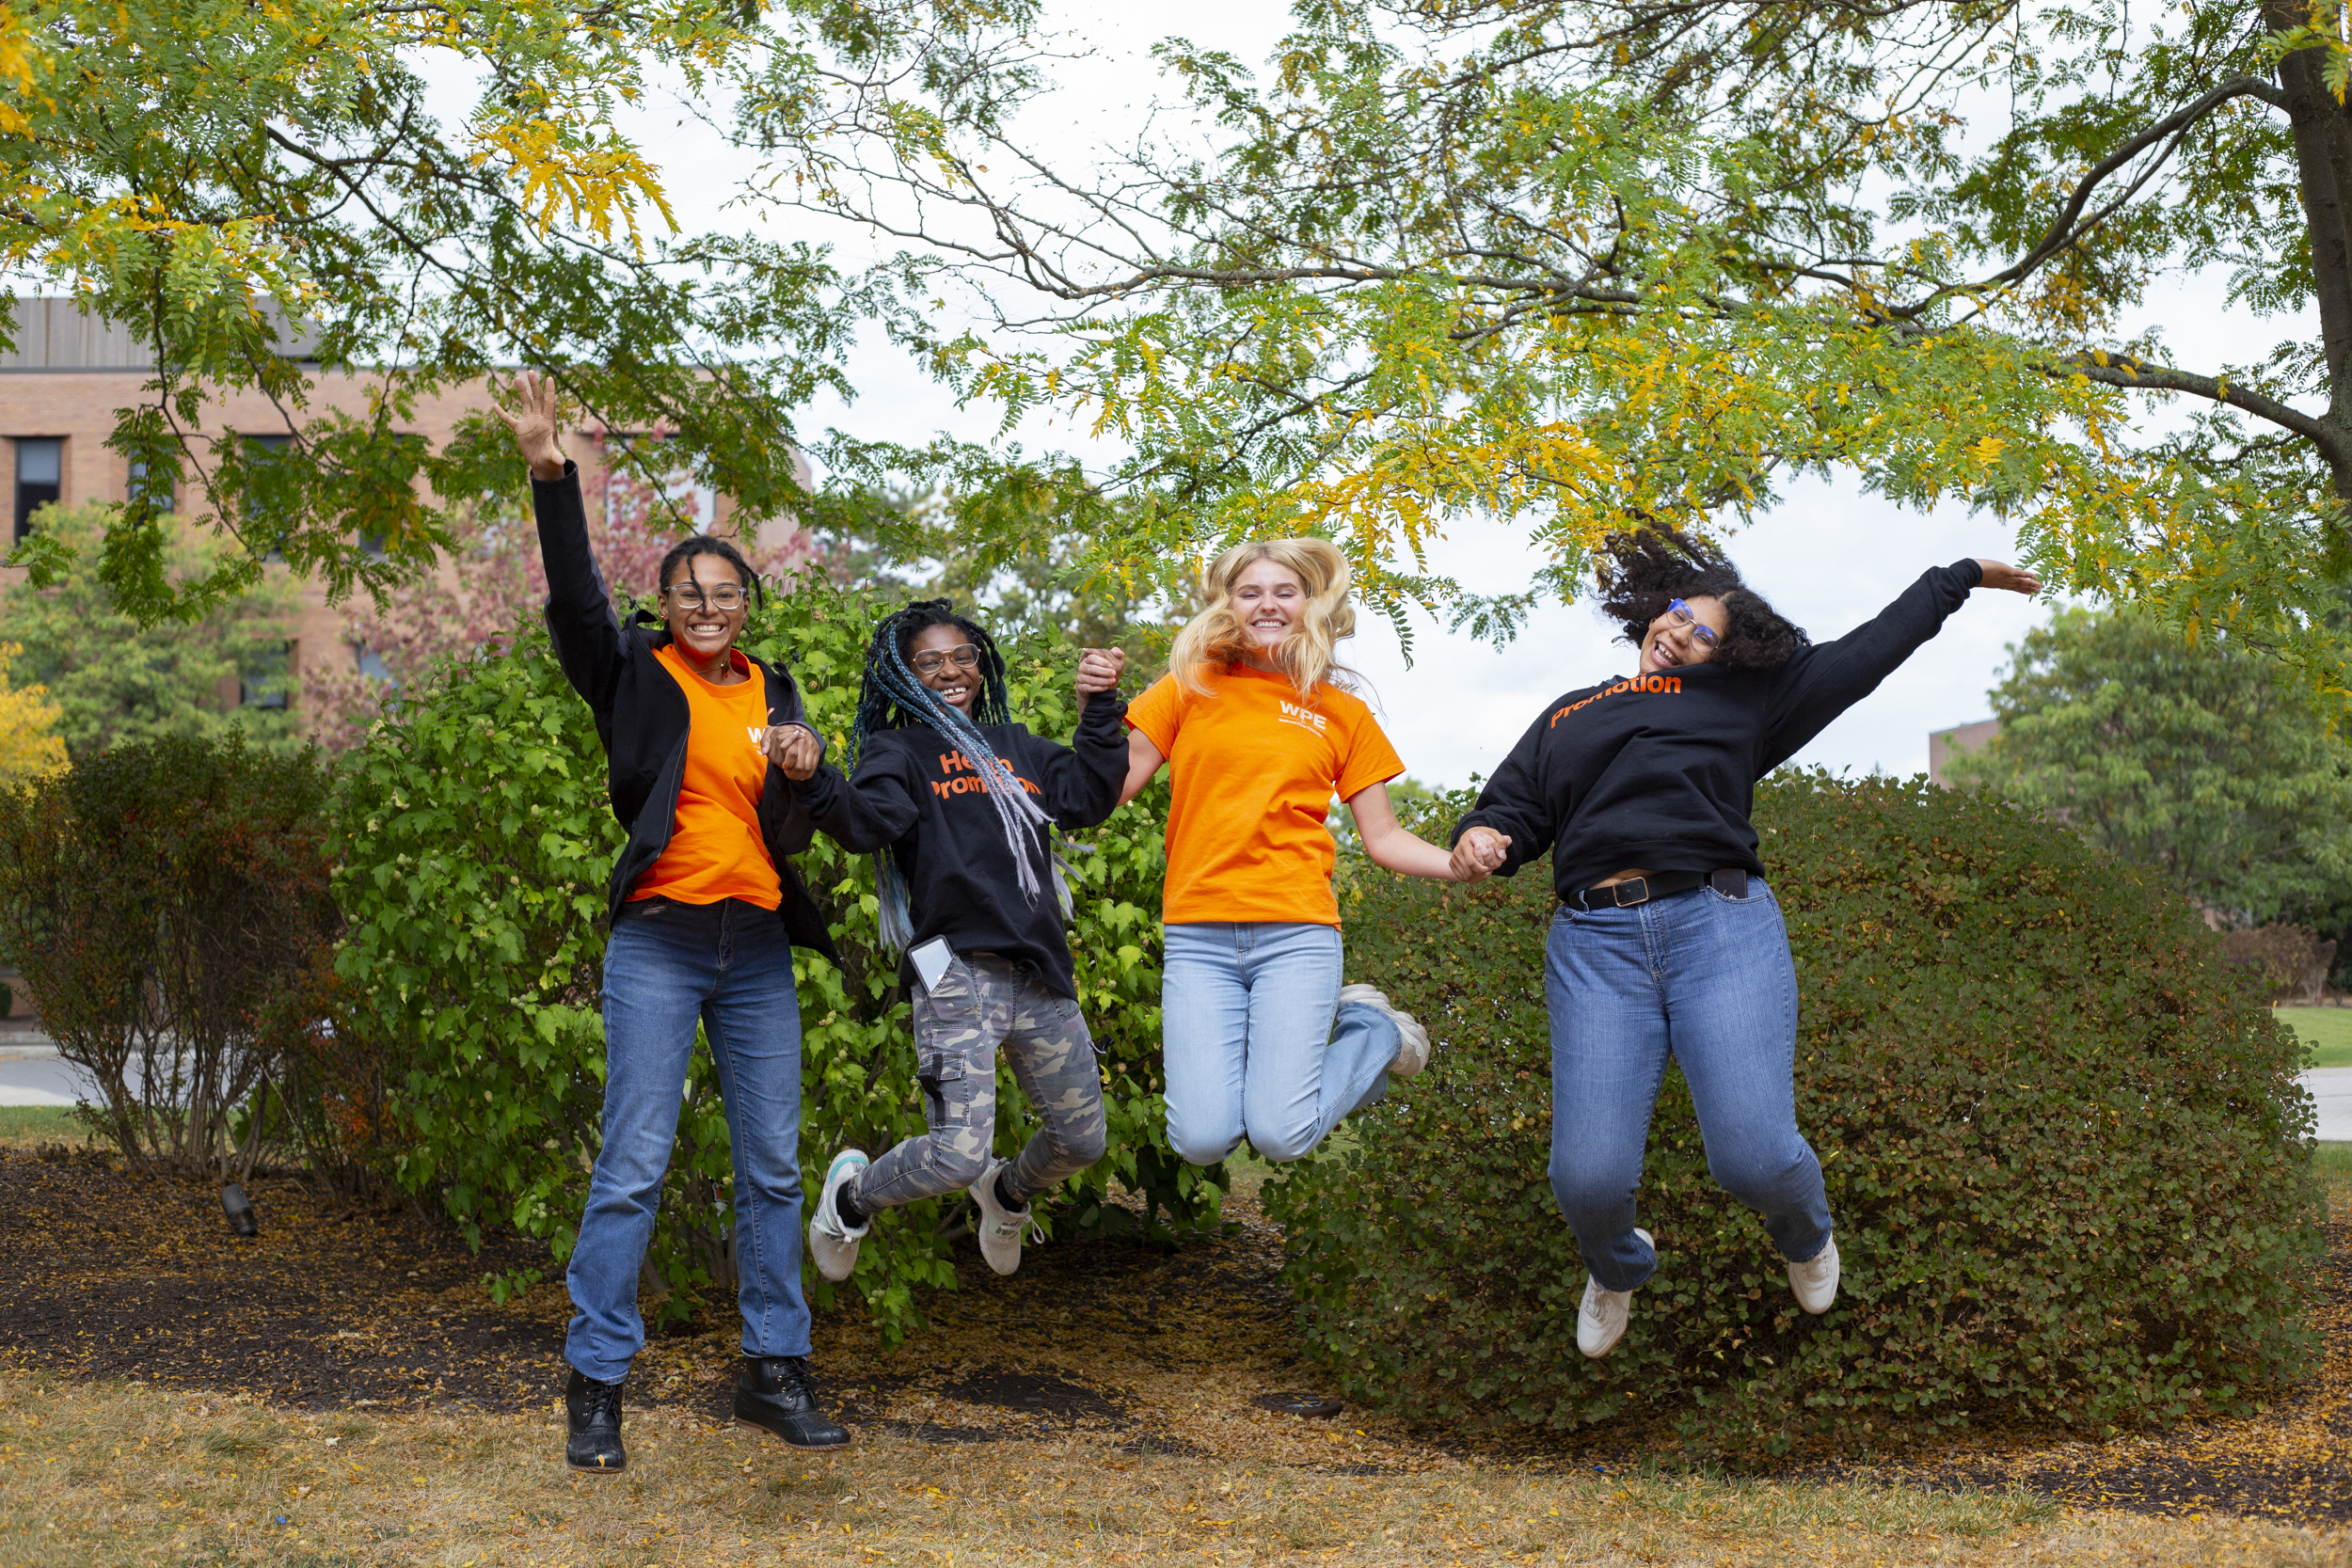 Four students jumping up in the air holding hands outside